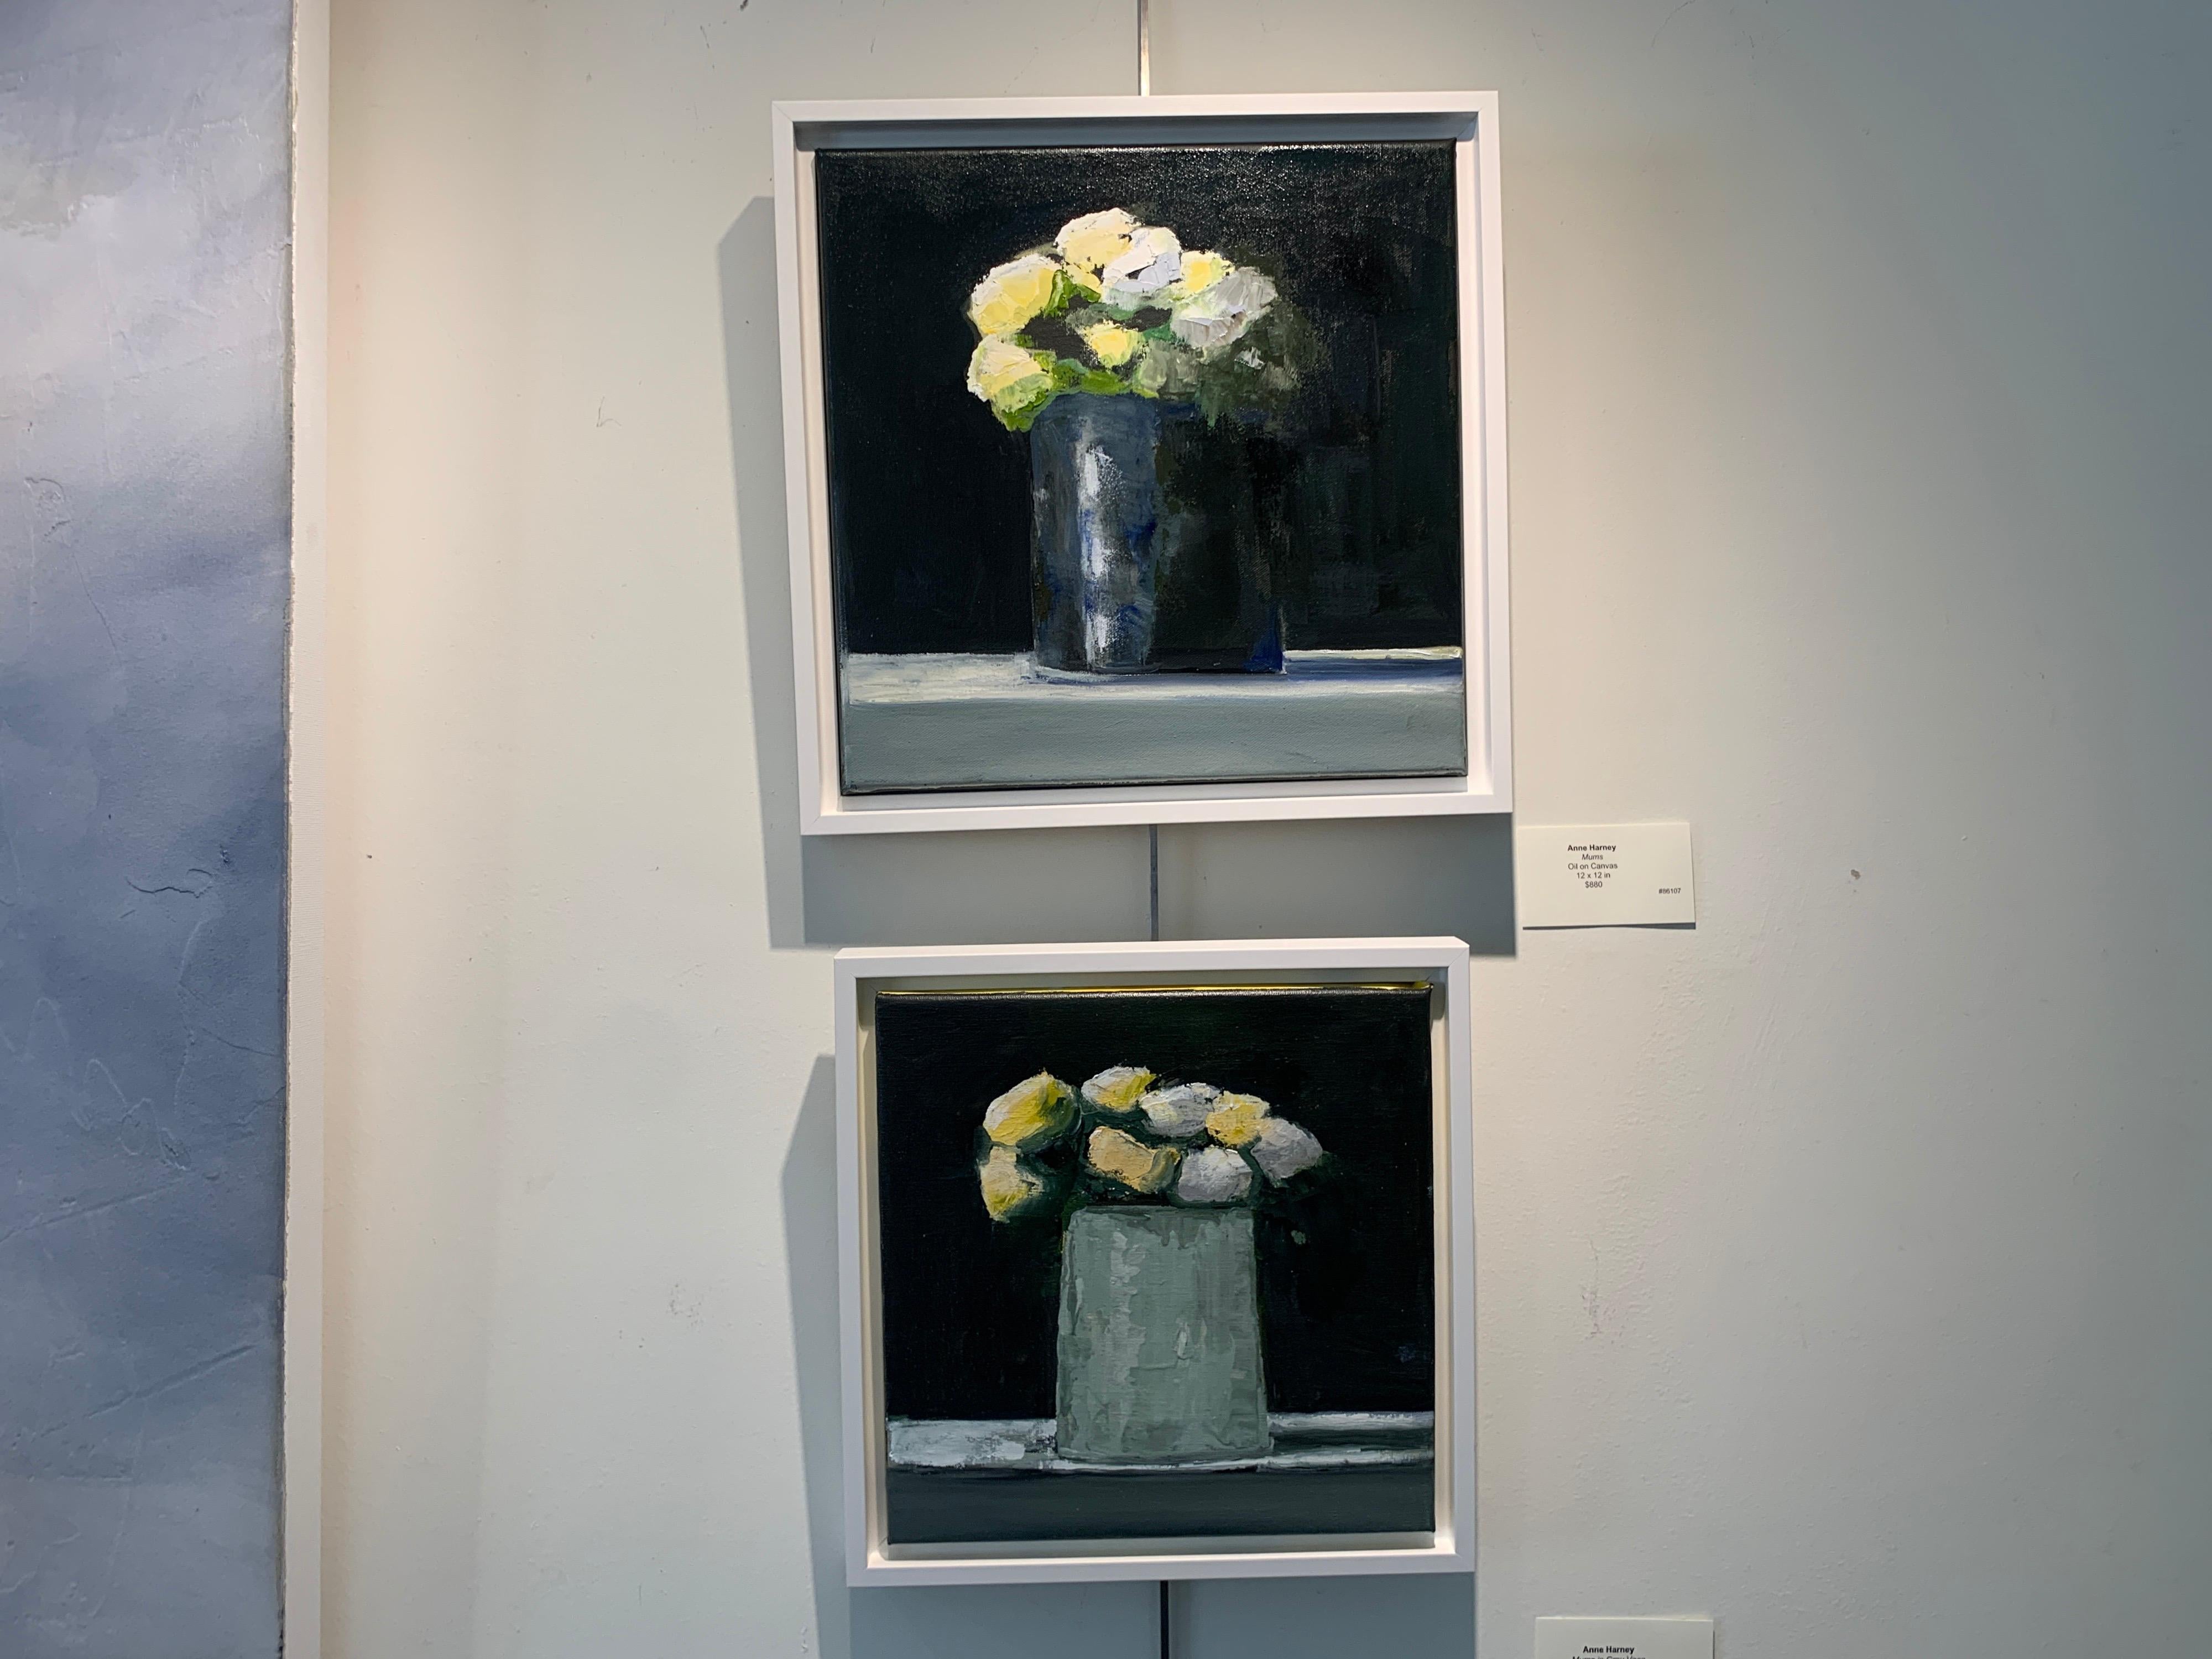 Mums by Anne Harney, Contemporary Floral Still Life Painting 1